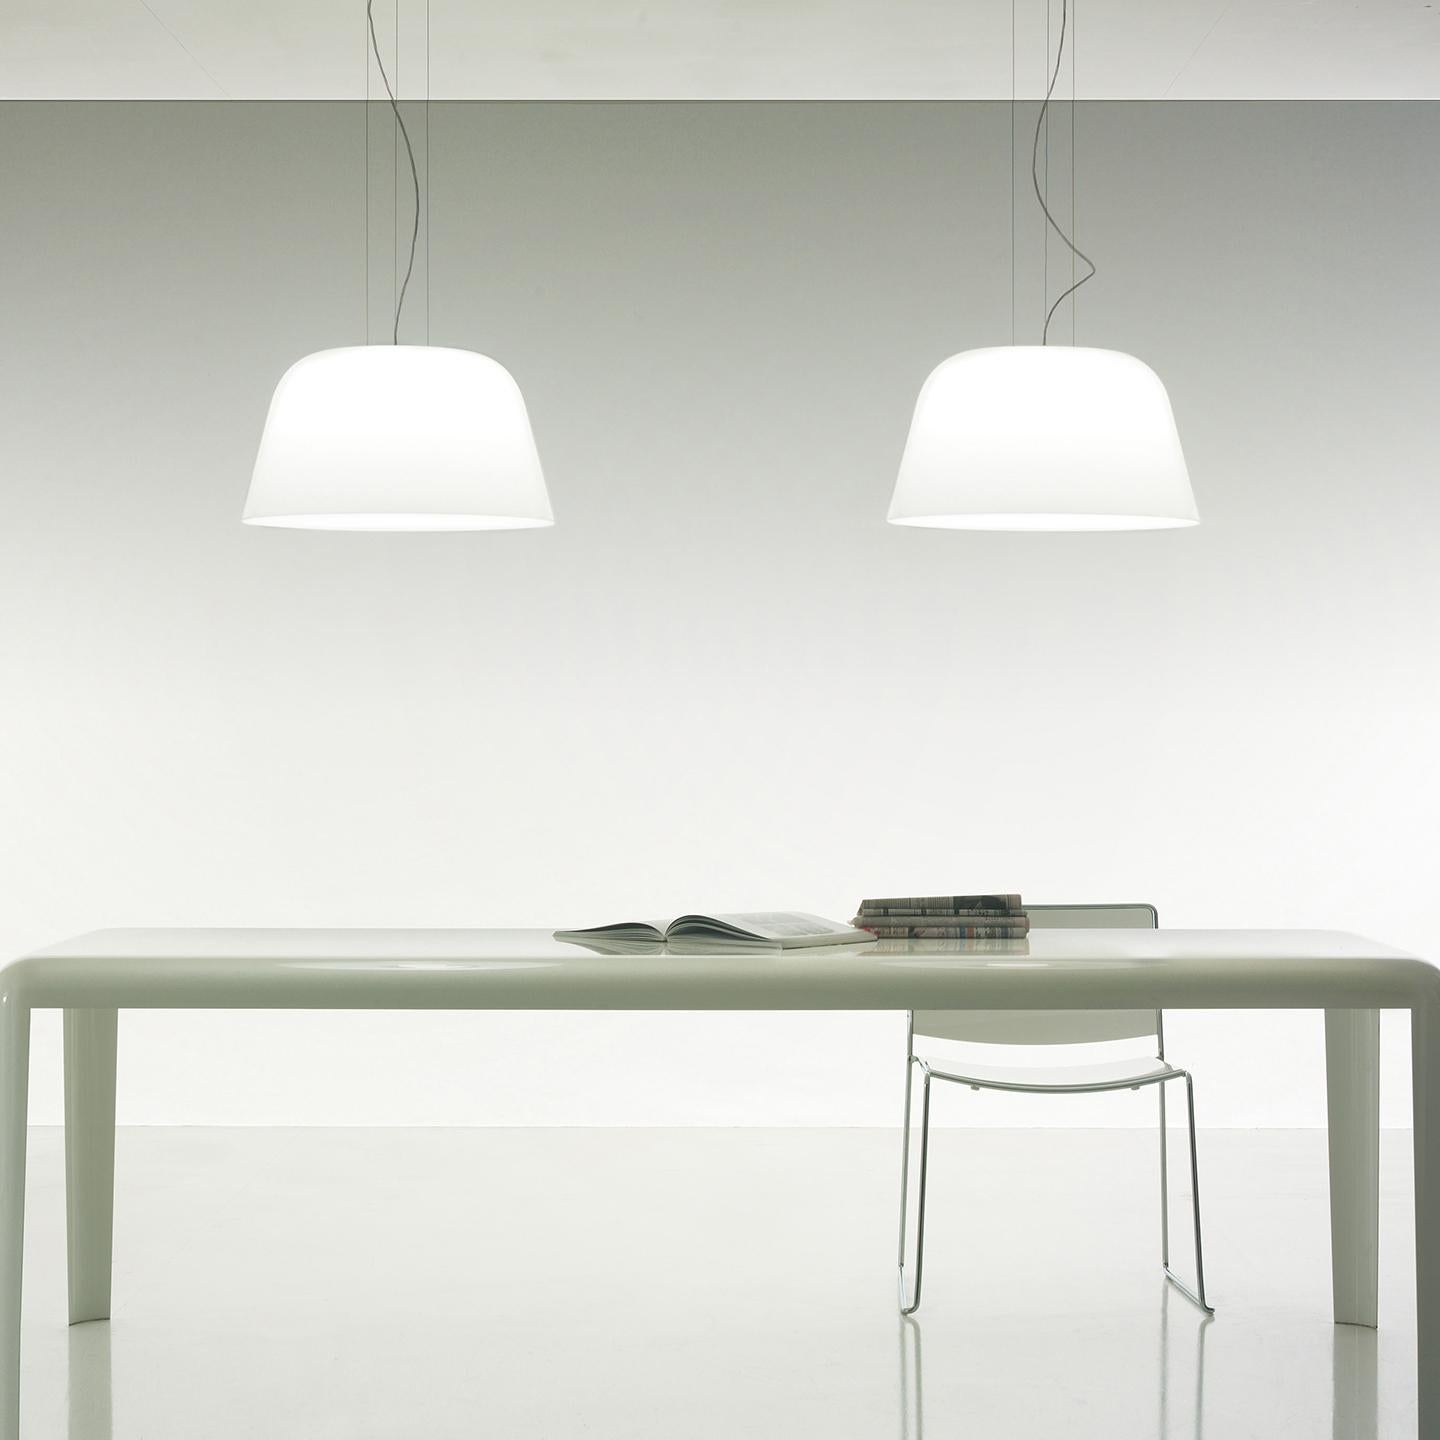 The Ayers pendant is designed with clean lines that create an impact. Designed by MarCo Piva in 2005, its hand blown diffuser is made of multiple layers of glass to create a rich, white look. This traditional Murano hand blown glass technique is